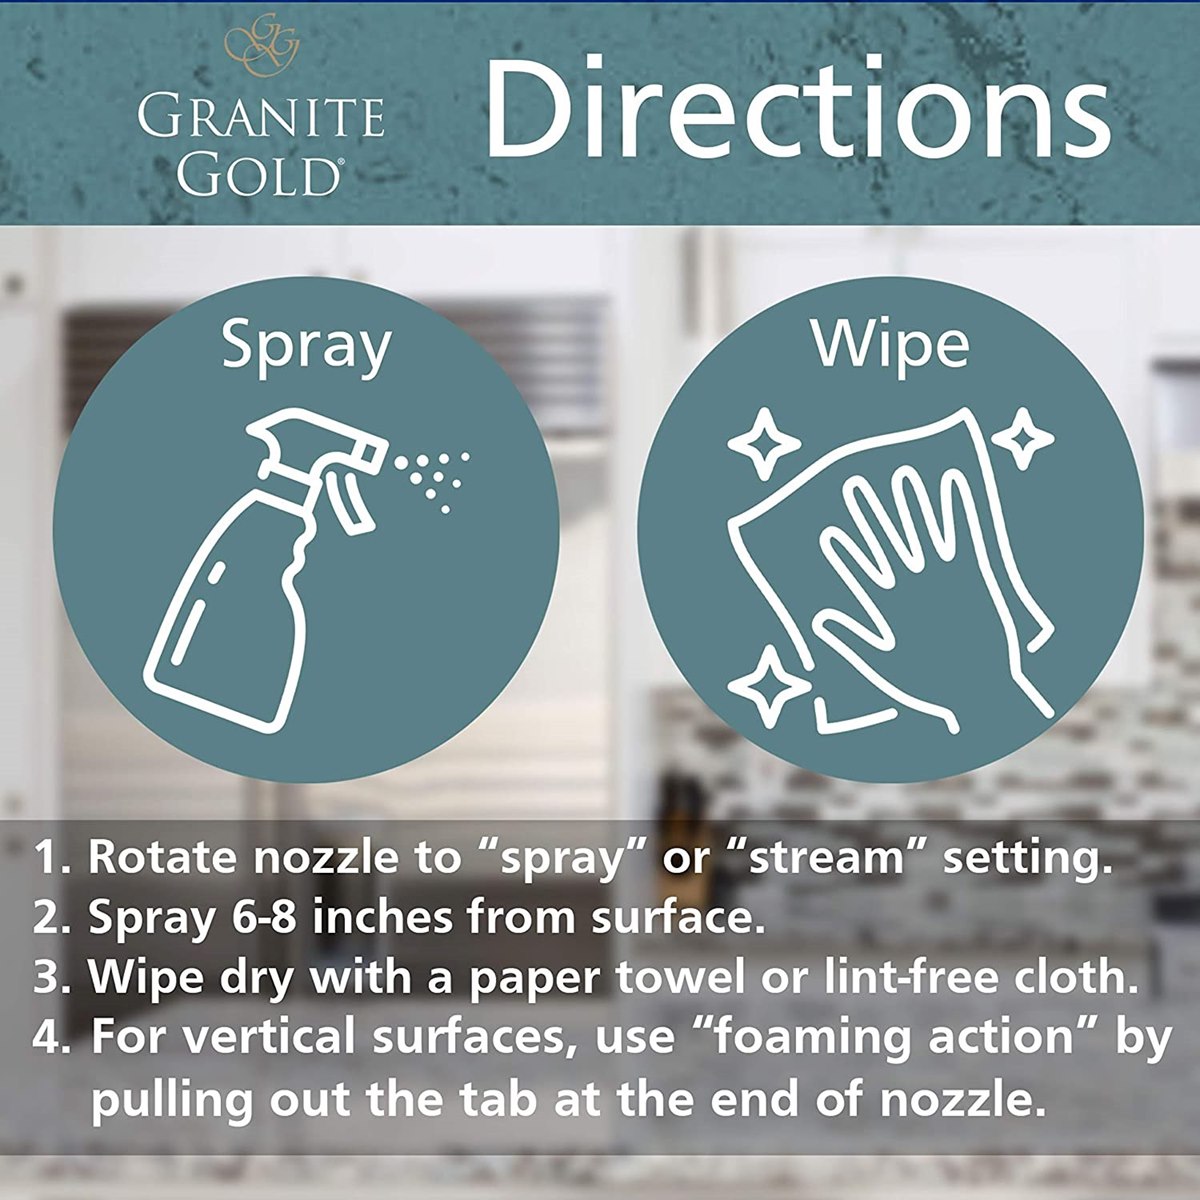 Directions for Using Granite Gold All Surface Cleaner